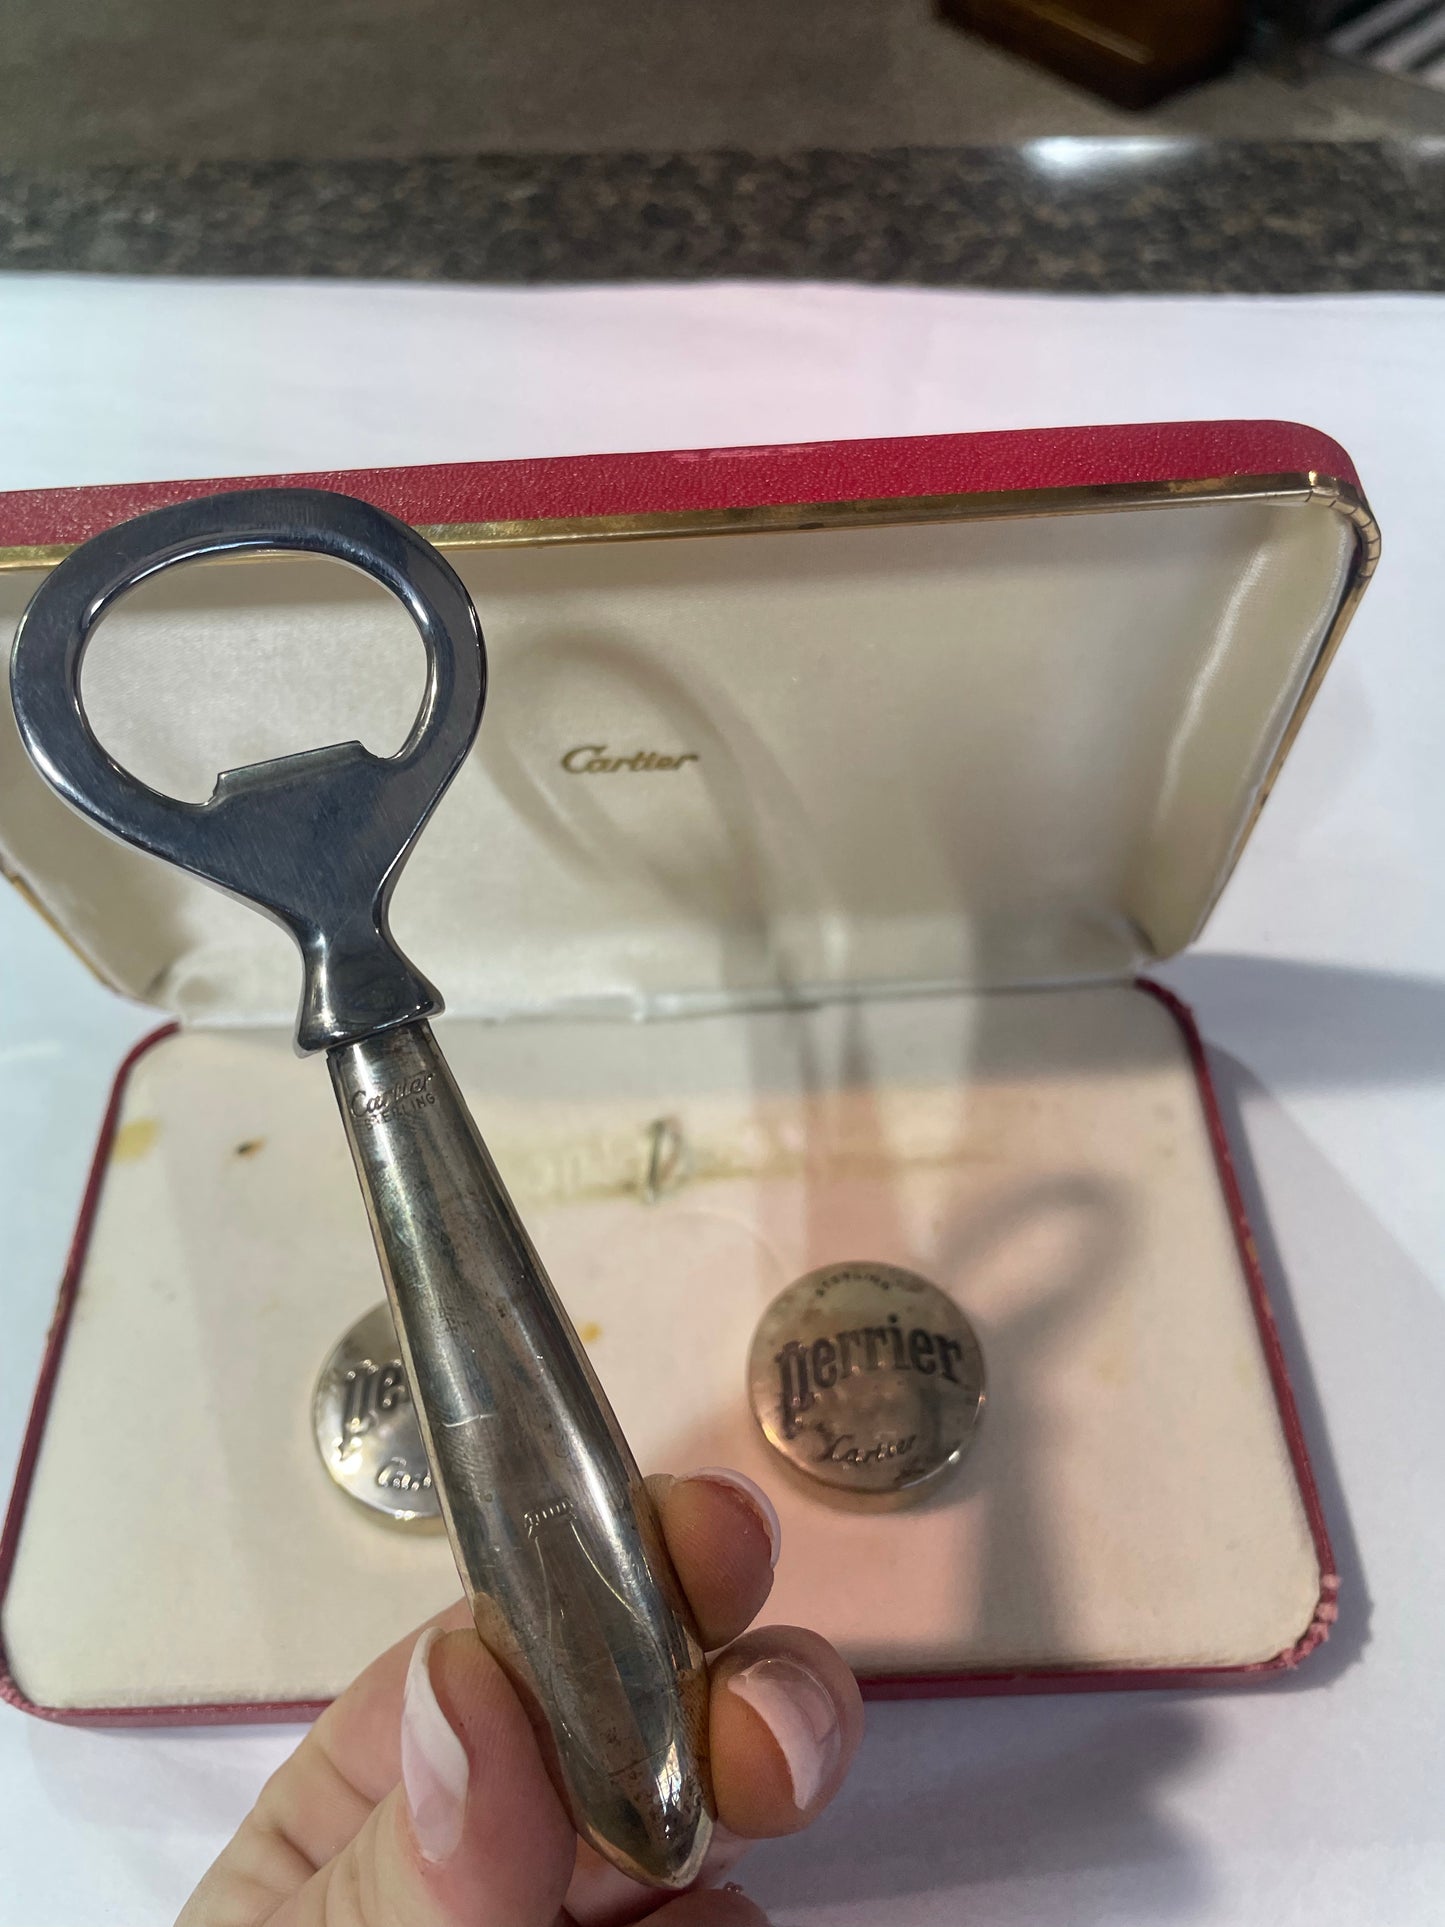 Vintage Cartier Sterling Bottle Opener and Caps for Perrier